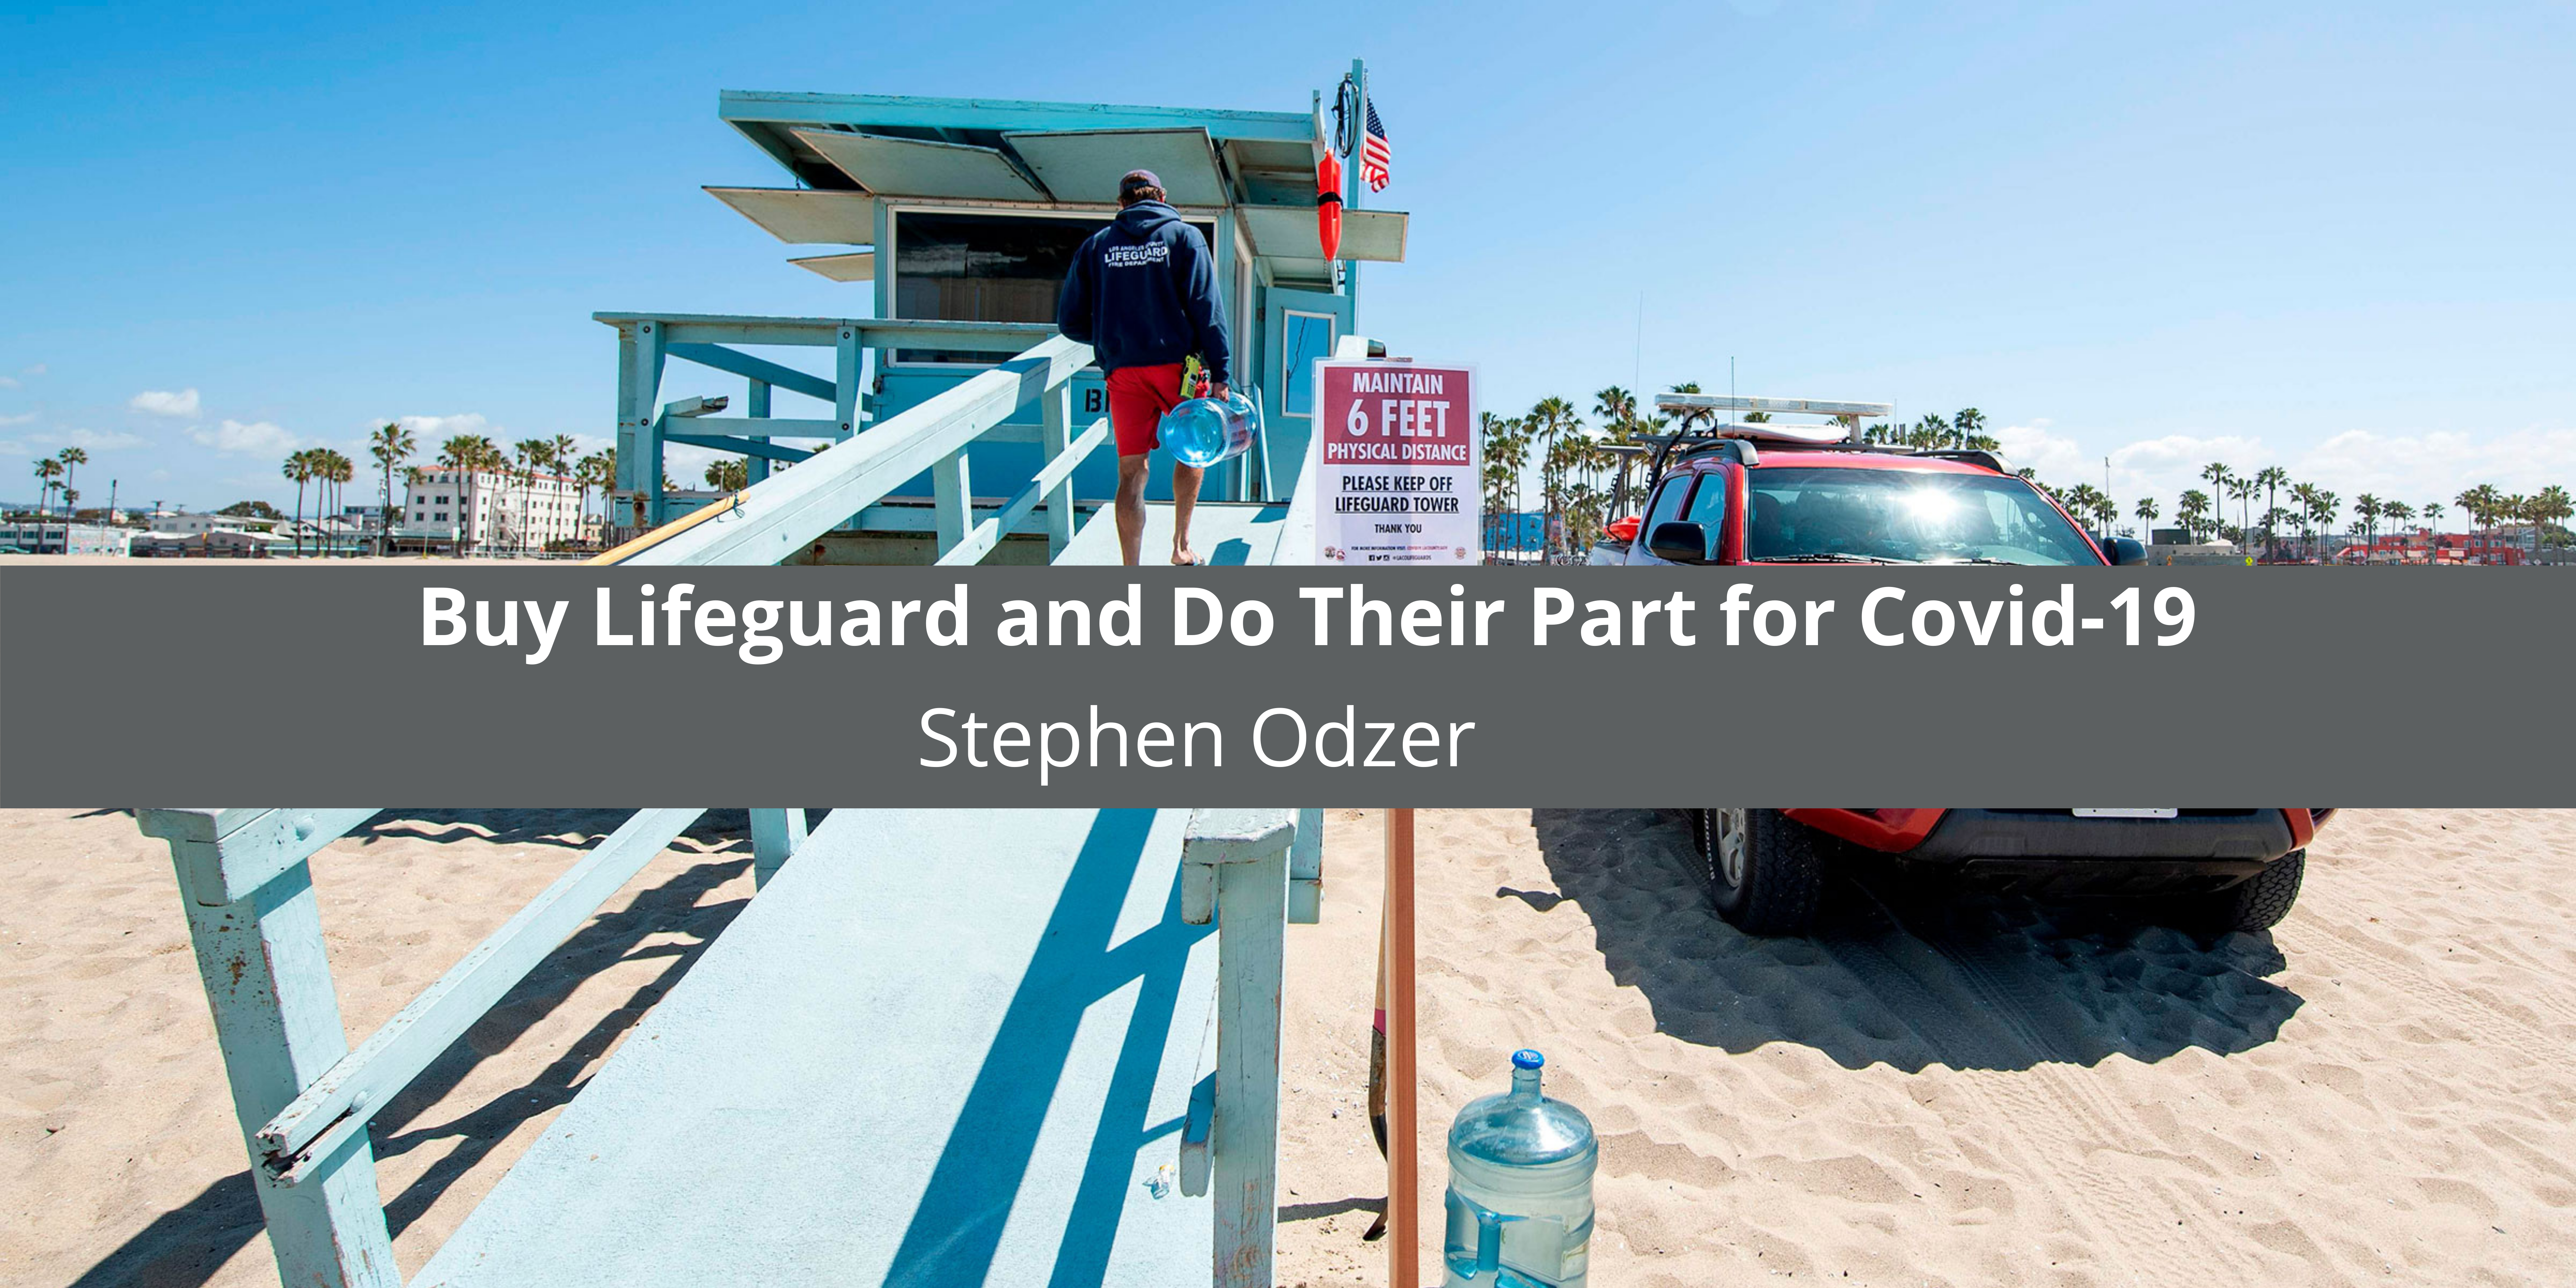 Buy Lifeguard and Stephen Odzer Do Their Part for Covid-19